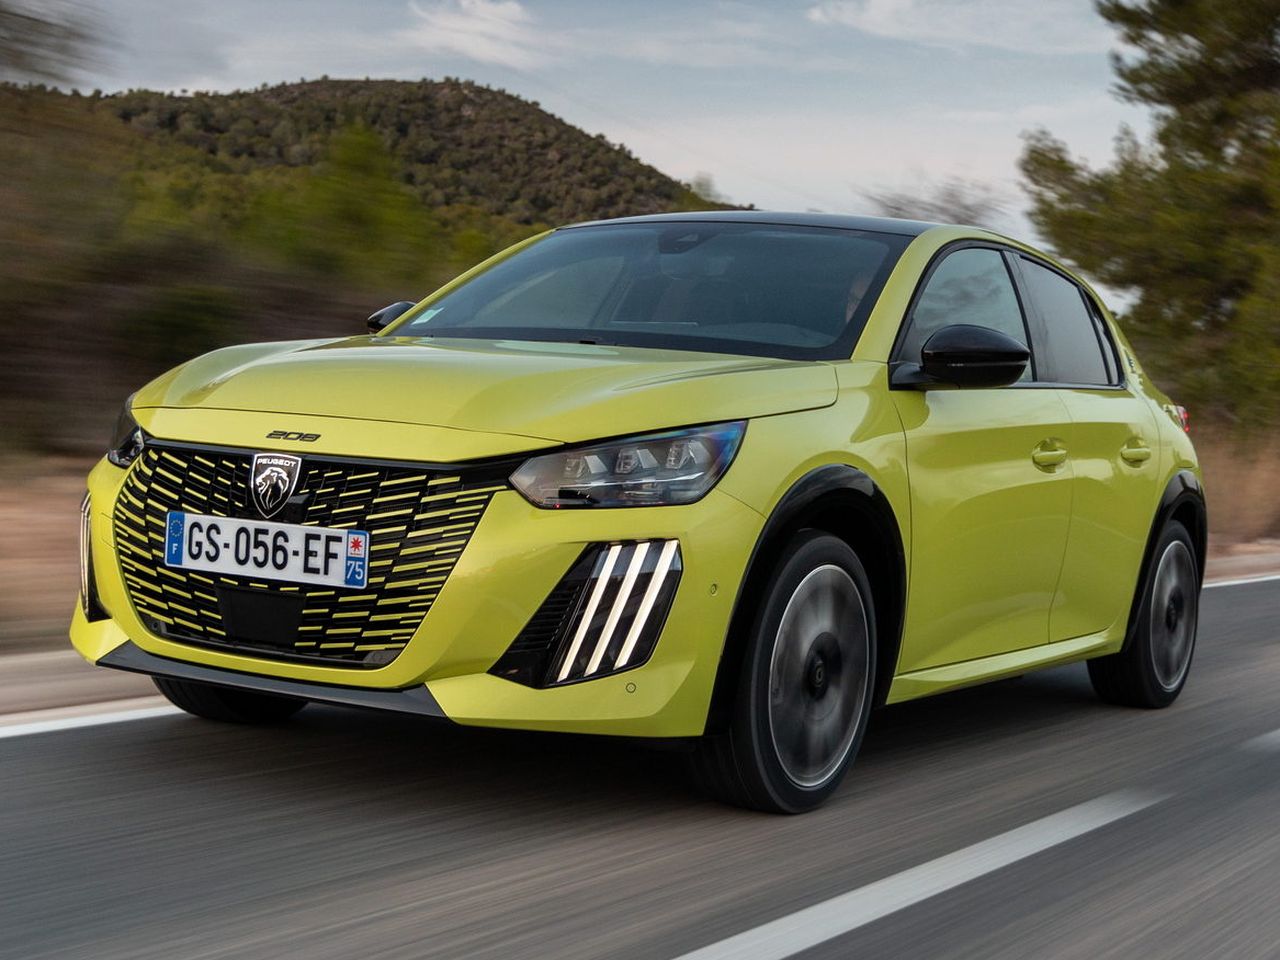 Peugeot launches electric 308 with new motor, 400 km range